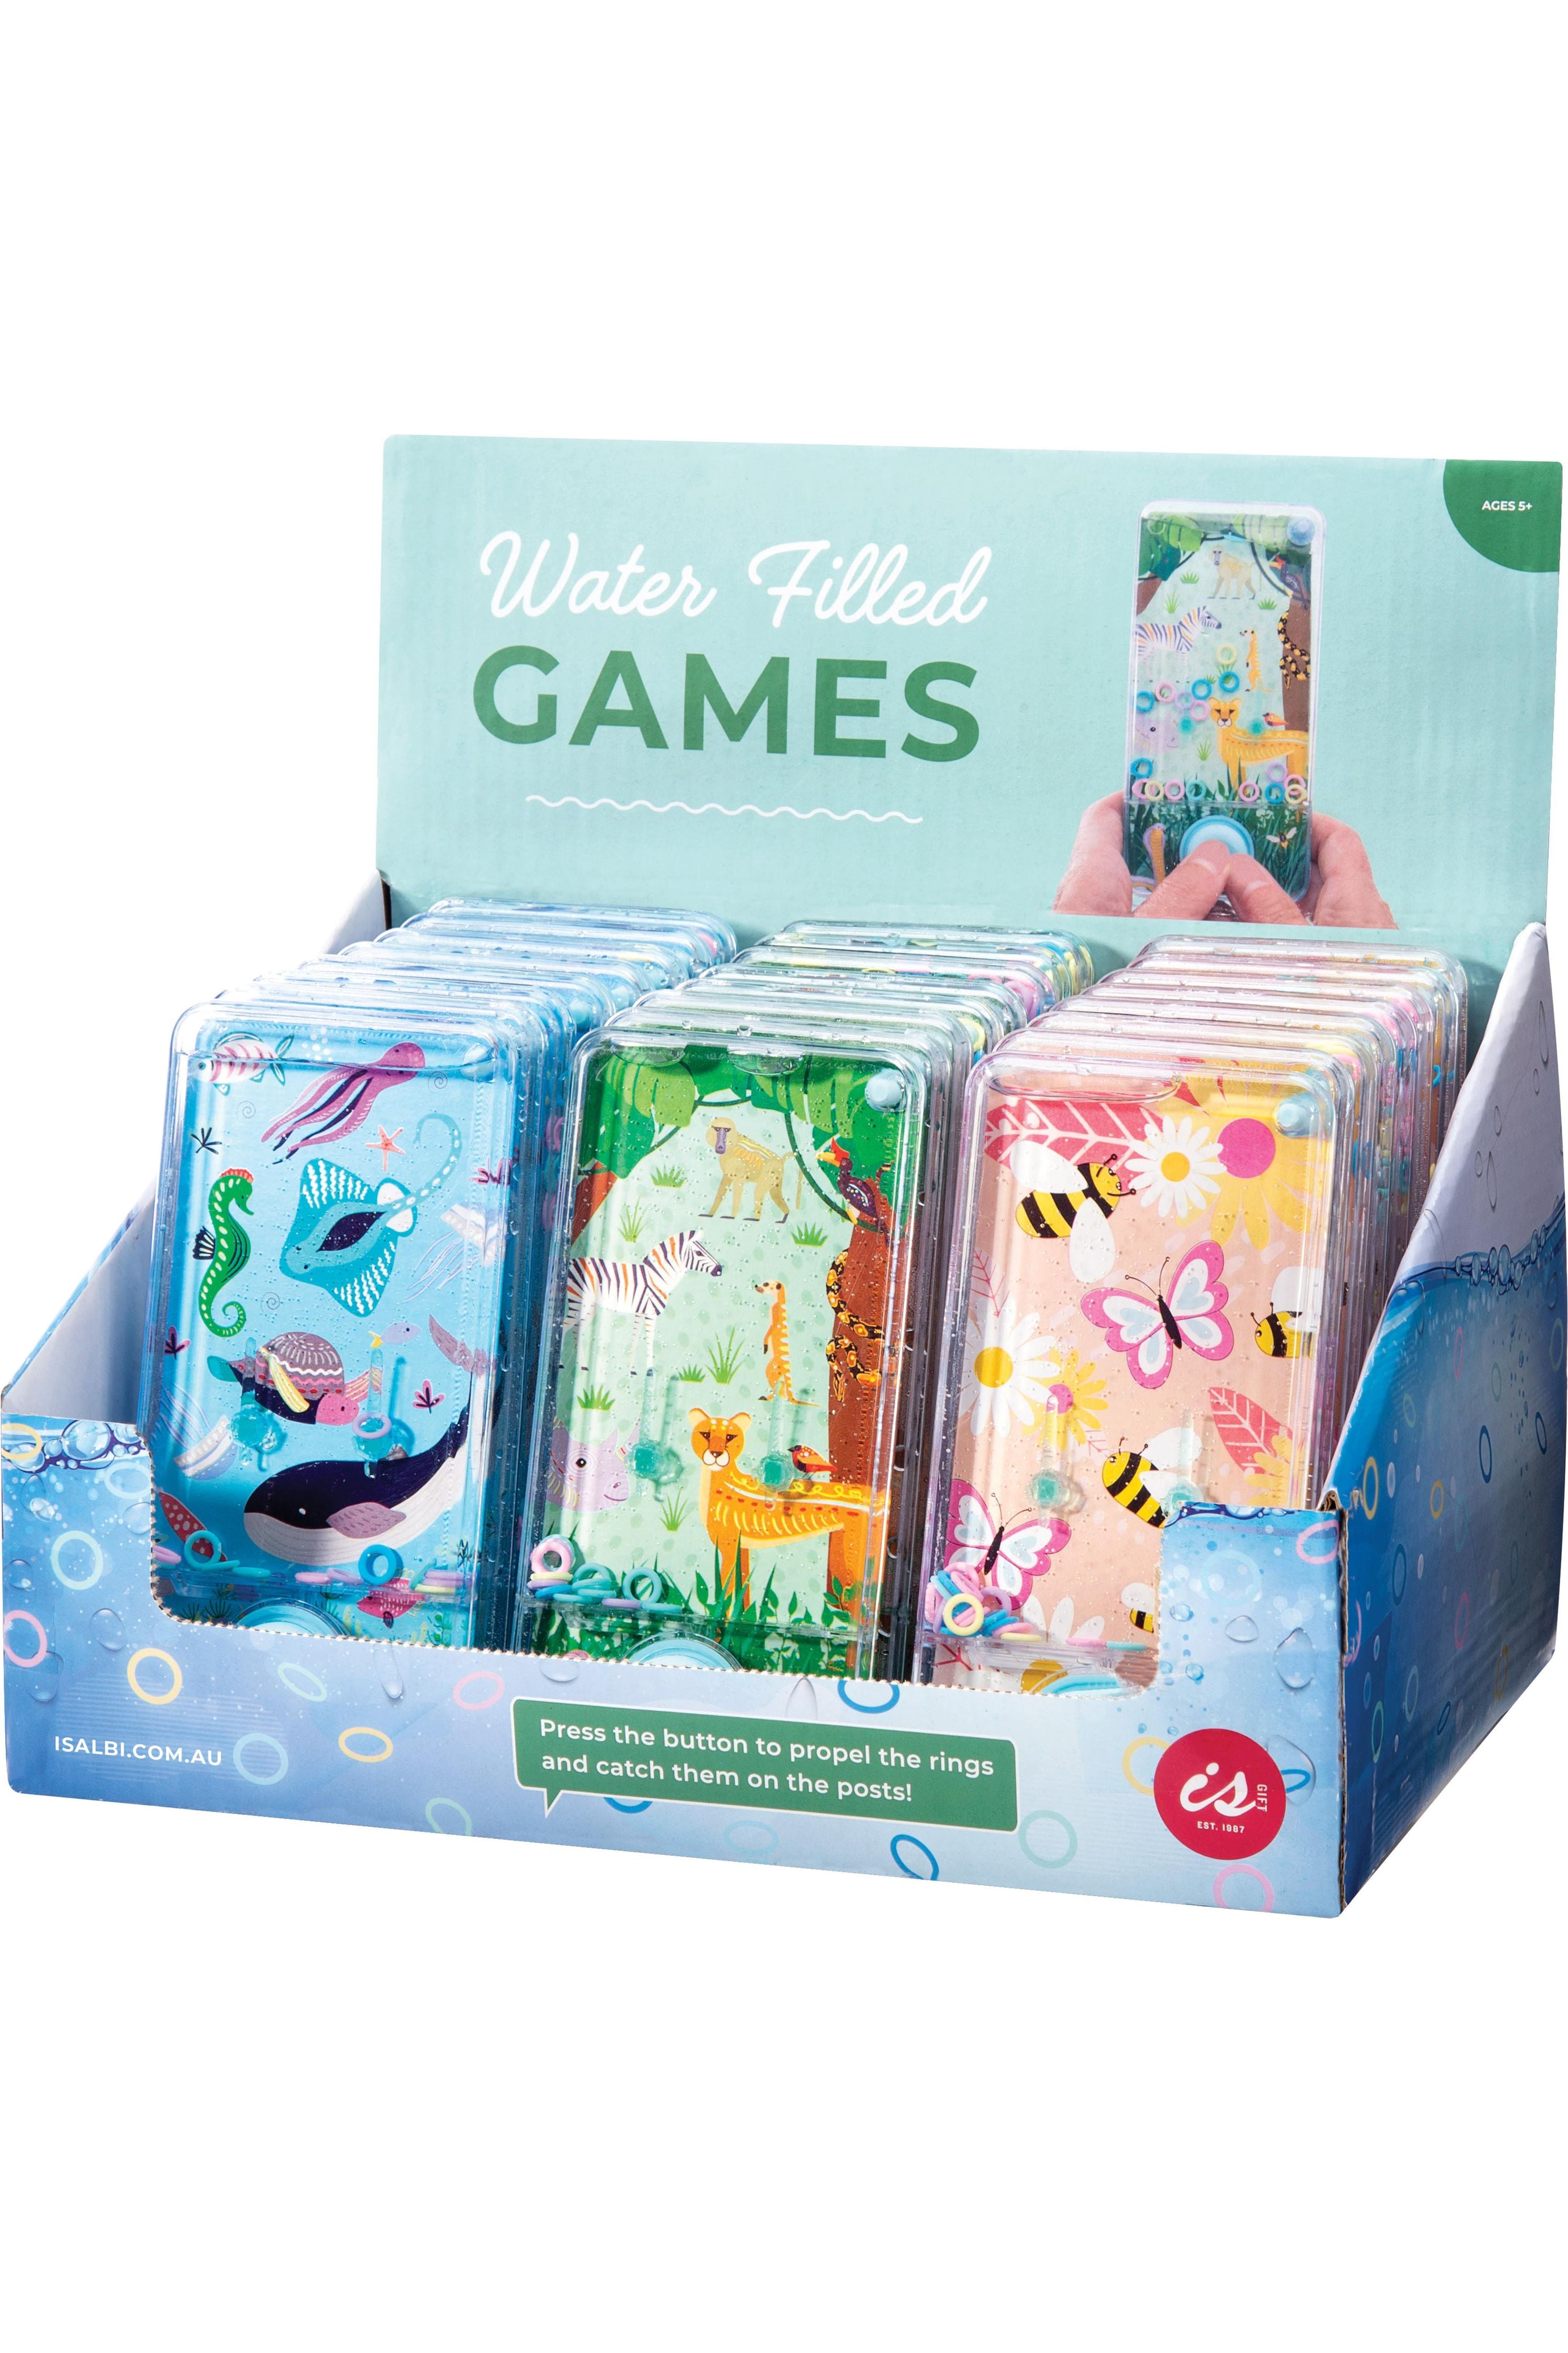 Water filled Games - Animals